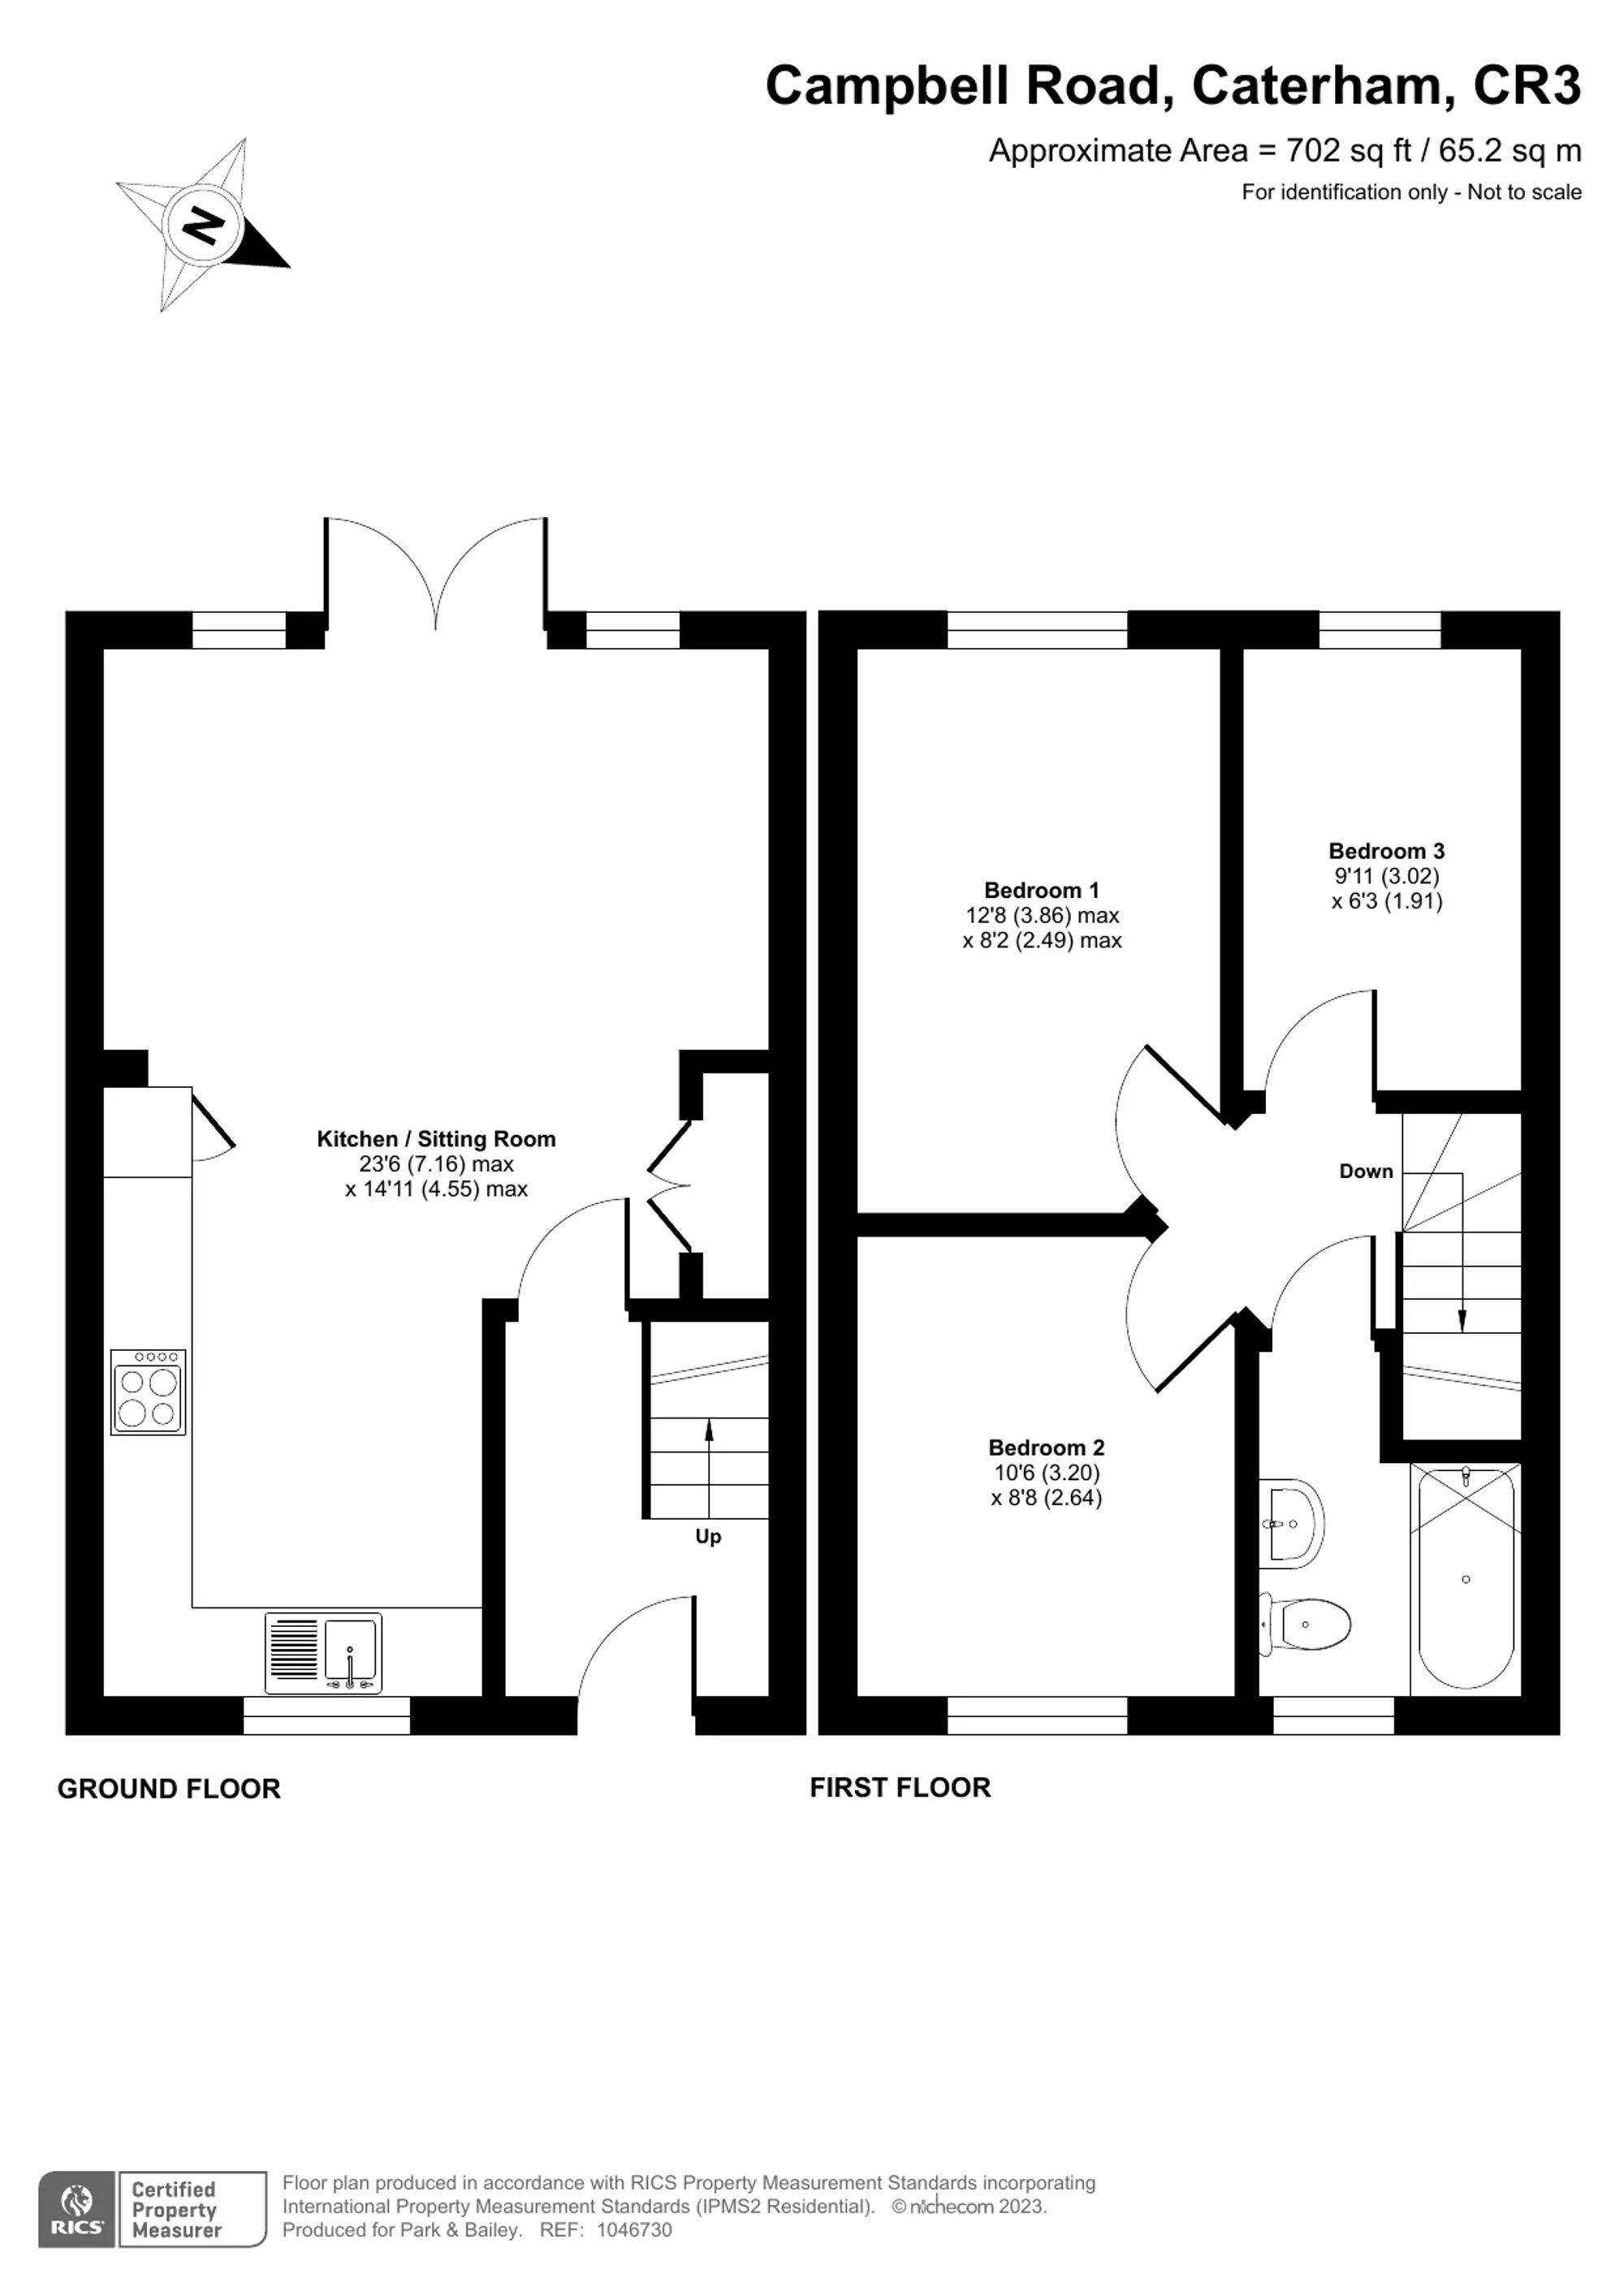 3 bed terraced house for sale in Campbell Road, Caterham - Property floorplan